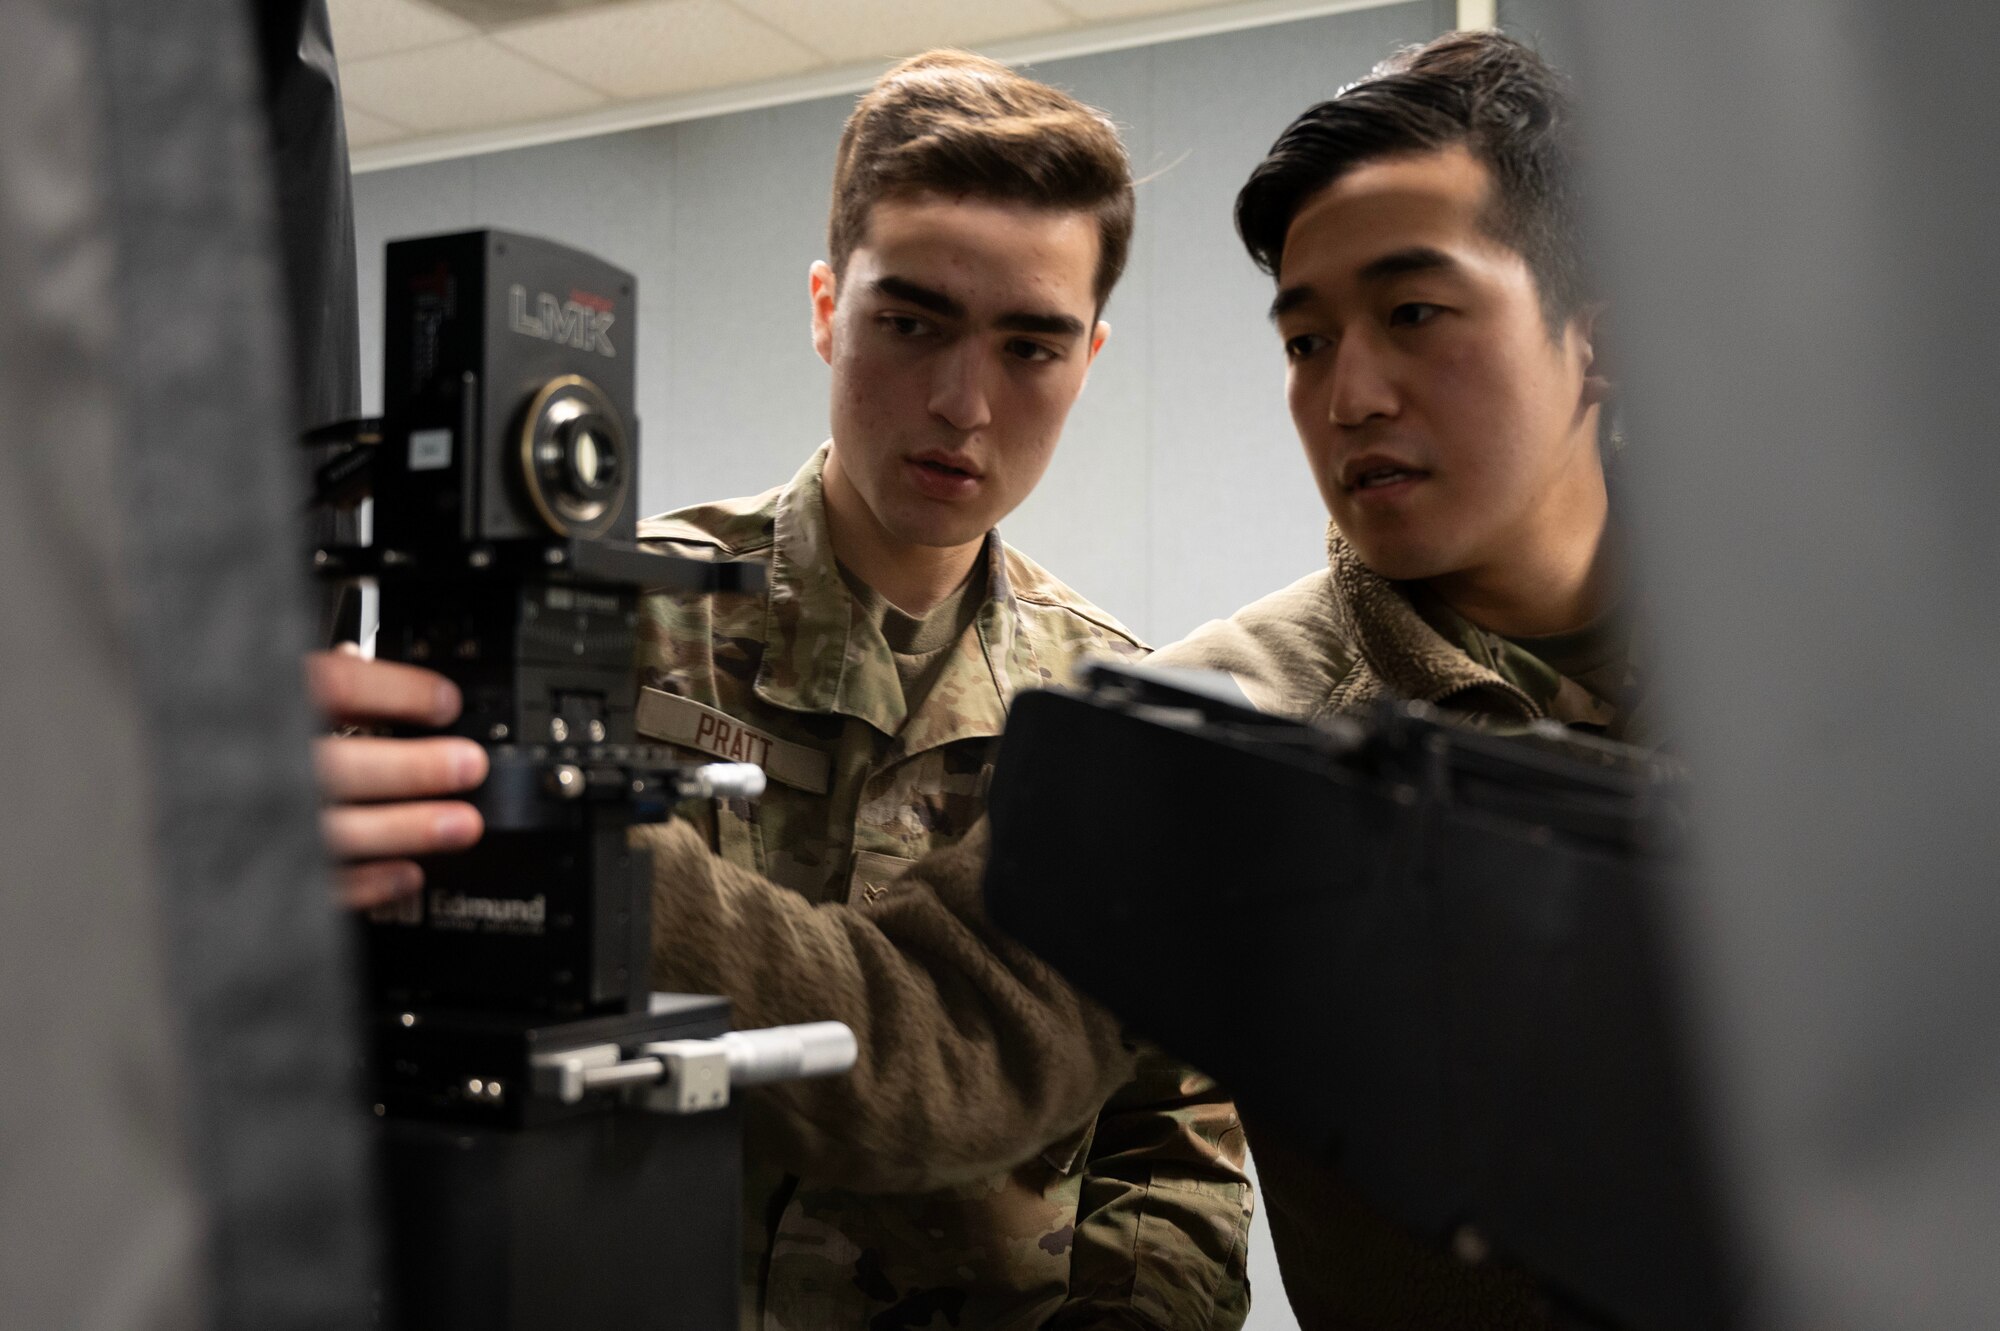 Airmen from the 62d Maintenance Squadron conduct rigorous testing to maximize the efficiency of components of the C-17 Globemaster III aircraft. By utilizing the squadron's interface test adapters, faulty electrical components are systematically diagnosed to pinpoint specific issues. These adapters, linked to computer systems, provide detailed diagnostic information to Airmen, guiding them in the precise identification and resolution of each component's malfunction. This process ensures optimal aircraft performance, vital for executing today's global airlift missions.